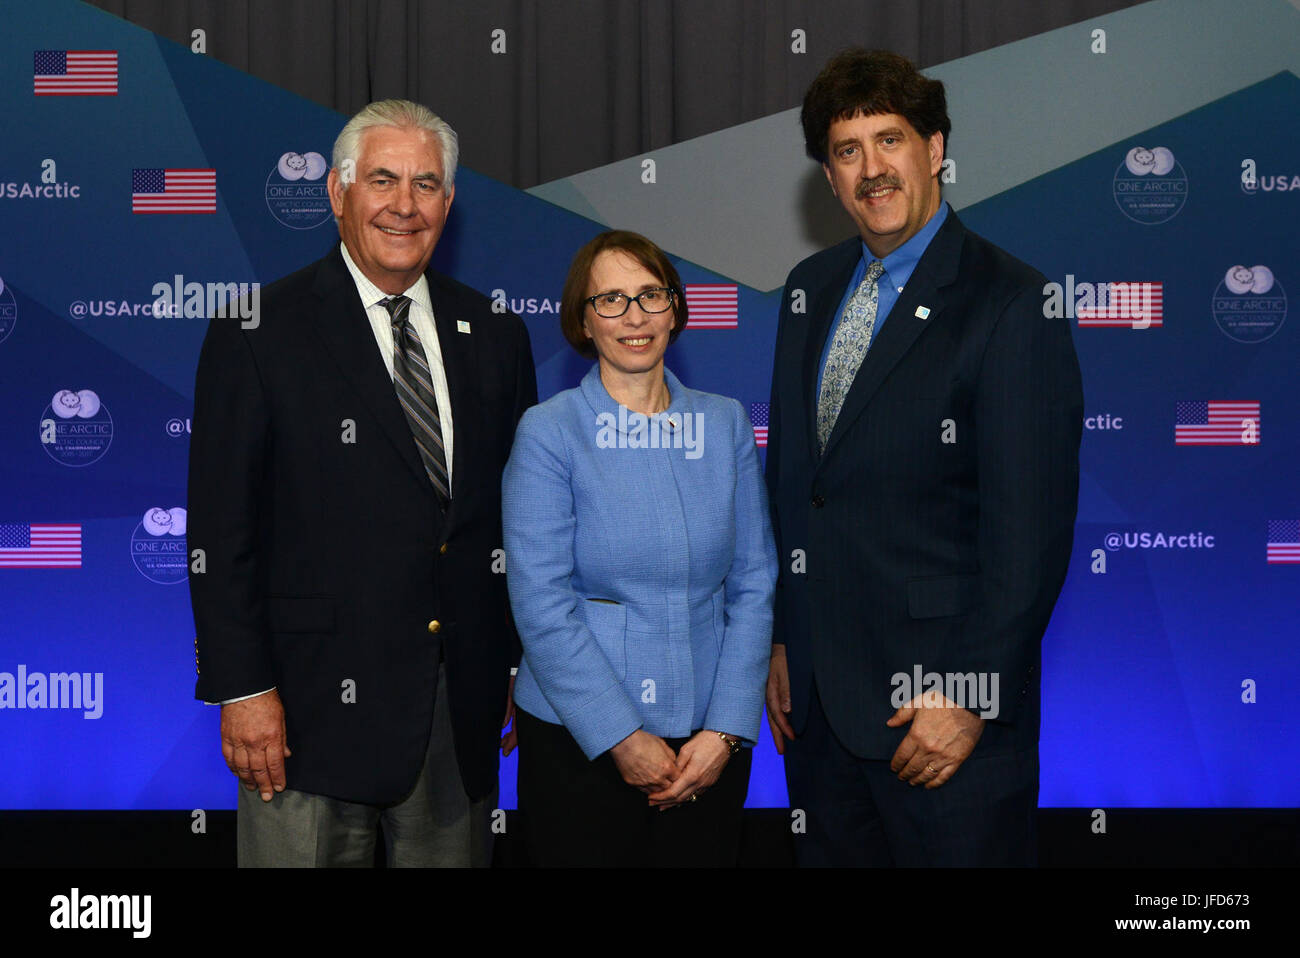 U.S. Secretary of State Rex Tillerson poses for a photo with Acting Assistant Secretary for Oceans and International Environmental and Scientific Affairs Judith Garber and Deputy Assistant Secretary for Oceans and Fisheries in the Bureau of Oceans and International Environmental and Scientific Affairs David Balton at the 10th Arctic Council Ministerial in Fairbanks, Alaska, on May 11, 2017. [U.S. Air Force photo/ ] Stock Photo